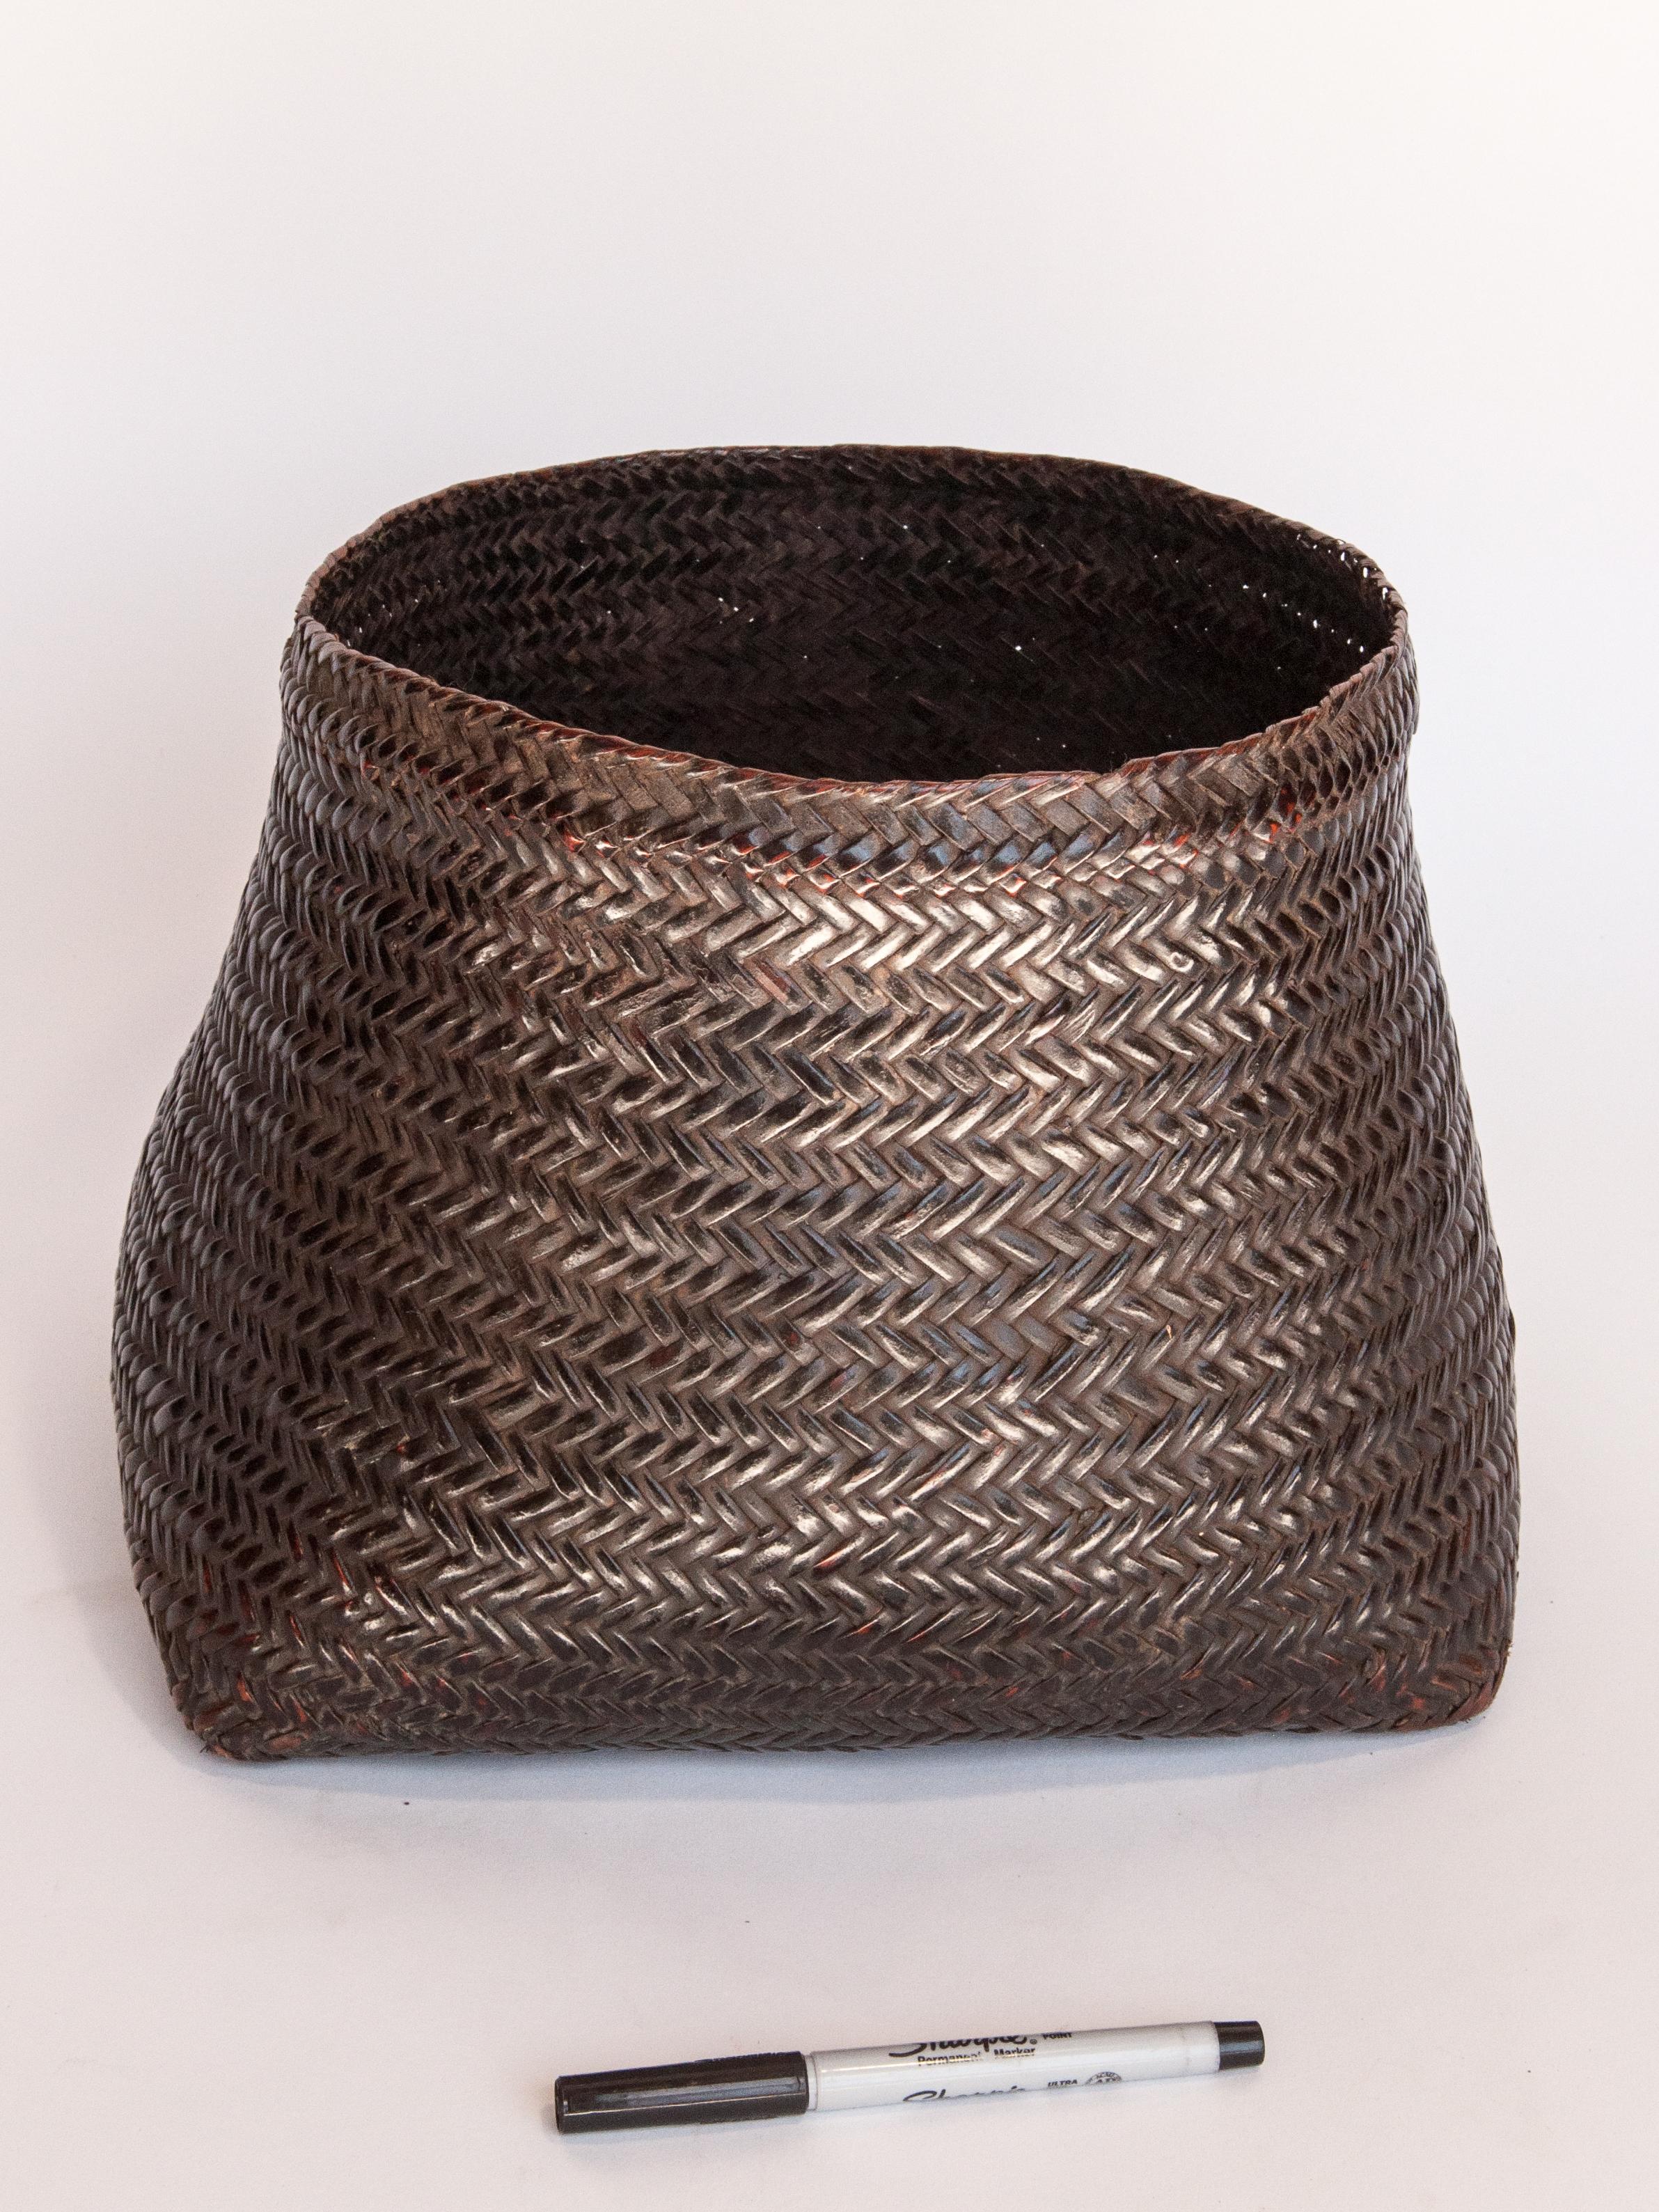 Vintage open mouthed kitchen basket from Arunachal Pradesh, India, mid-20th century.
This beautifully patinated basket comes from the northeast Indian state of Arunachal Pradesh, home to the Apa Tani and Nishi, among a large number of widely diverse